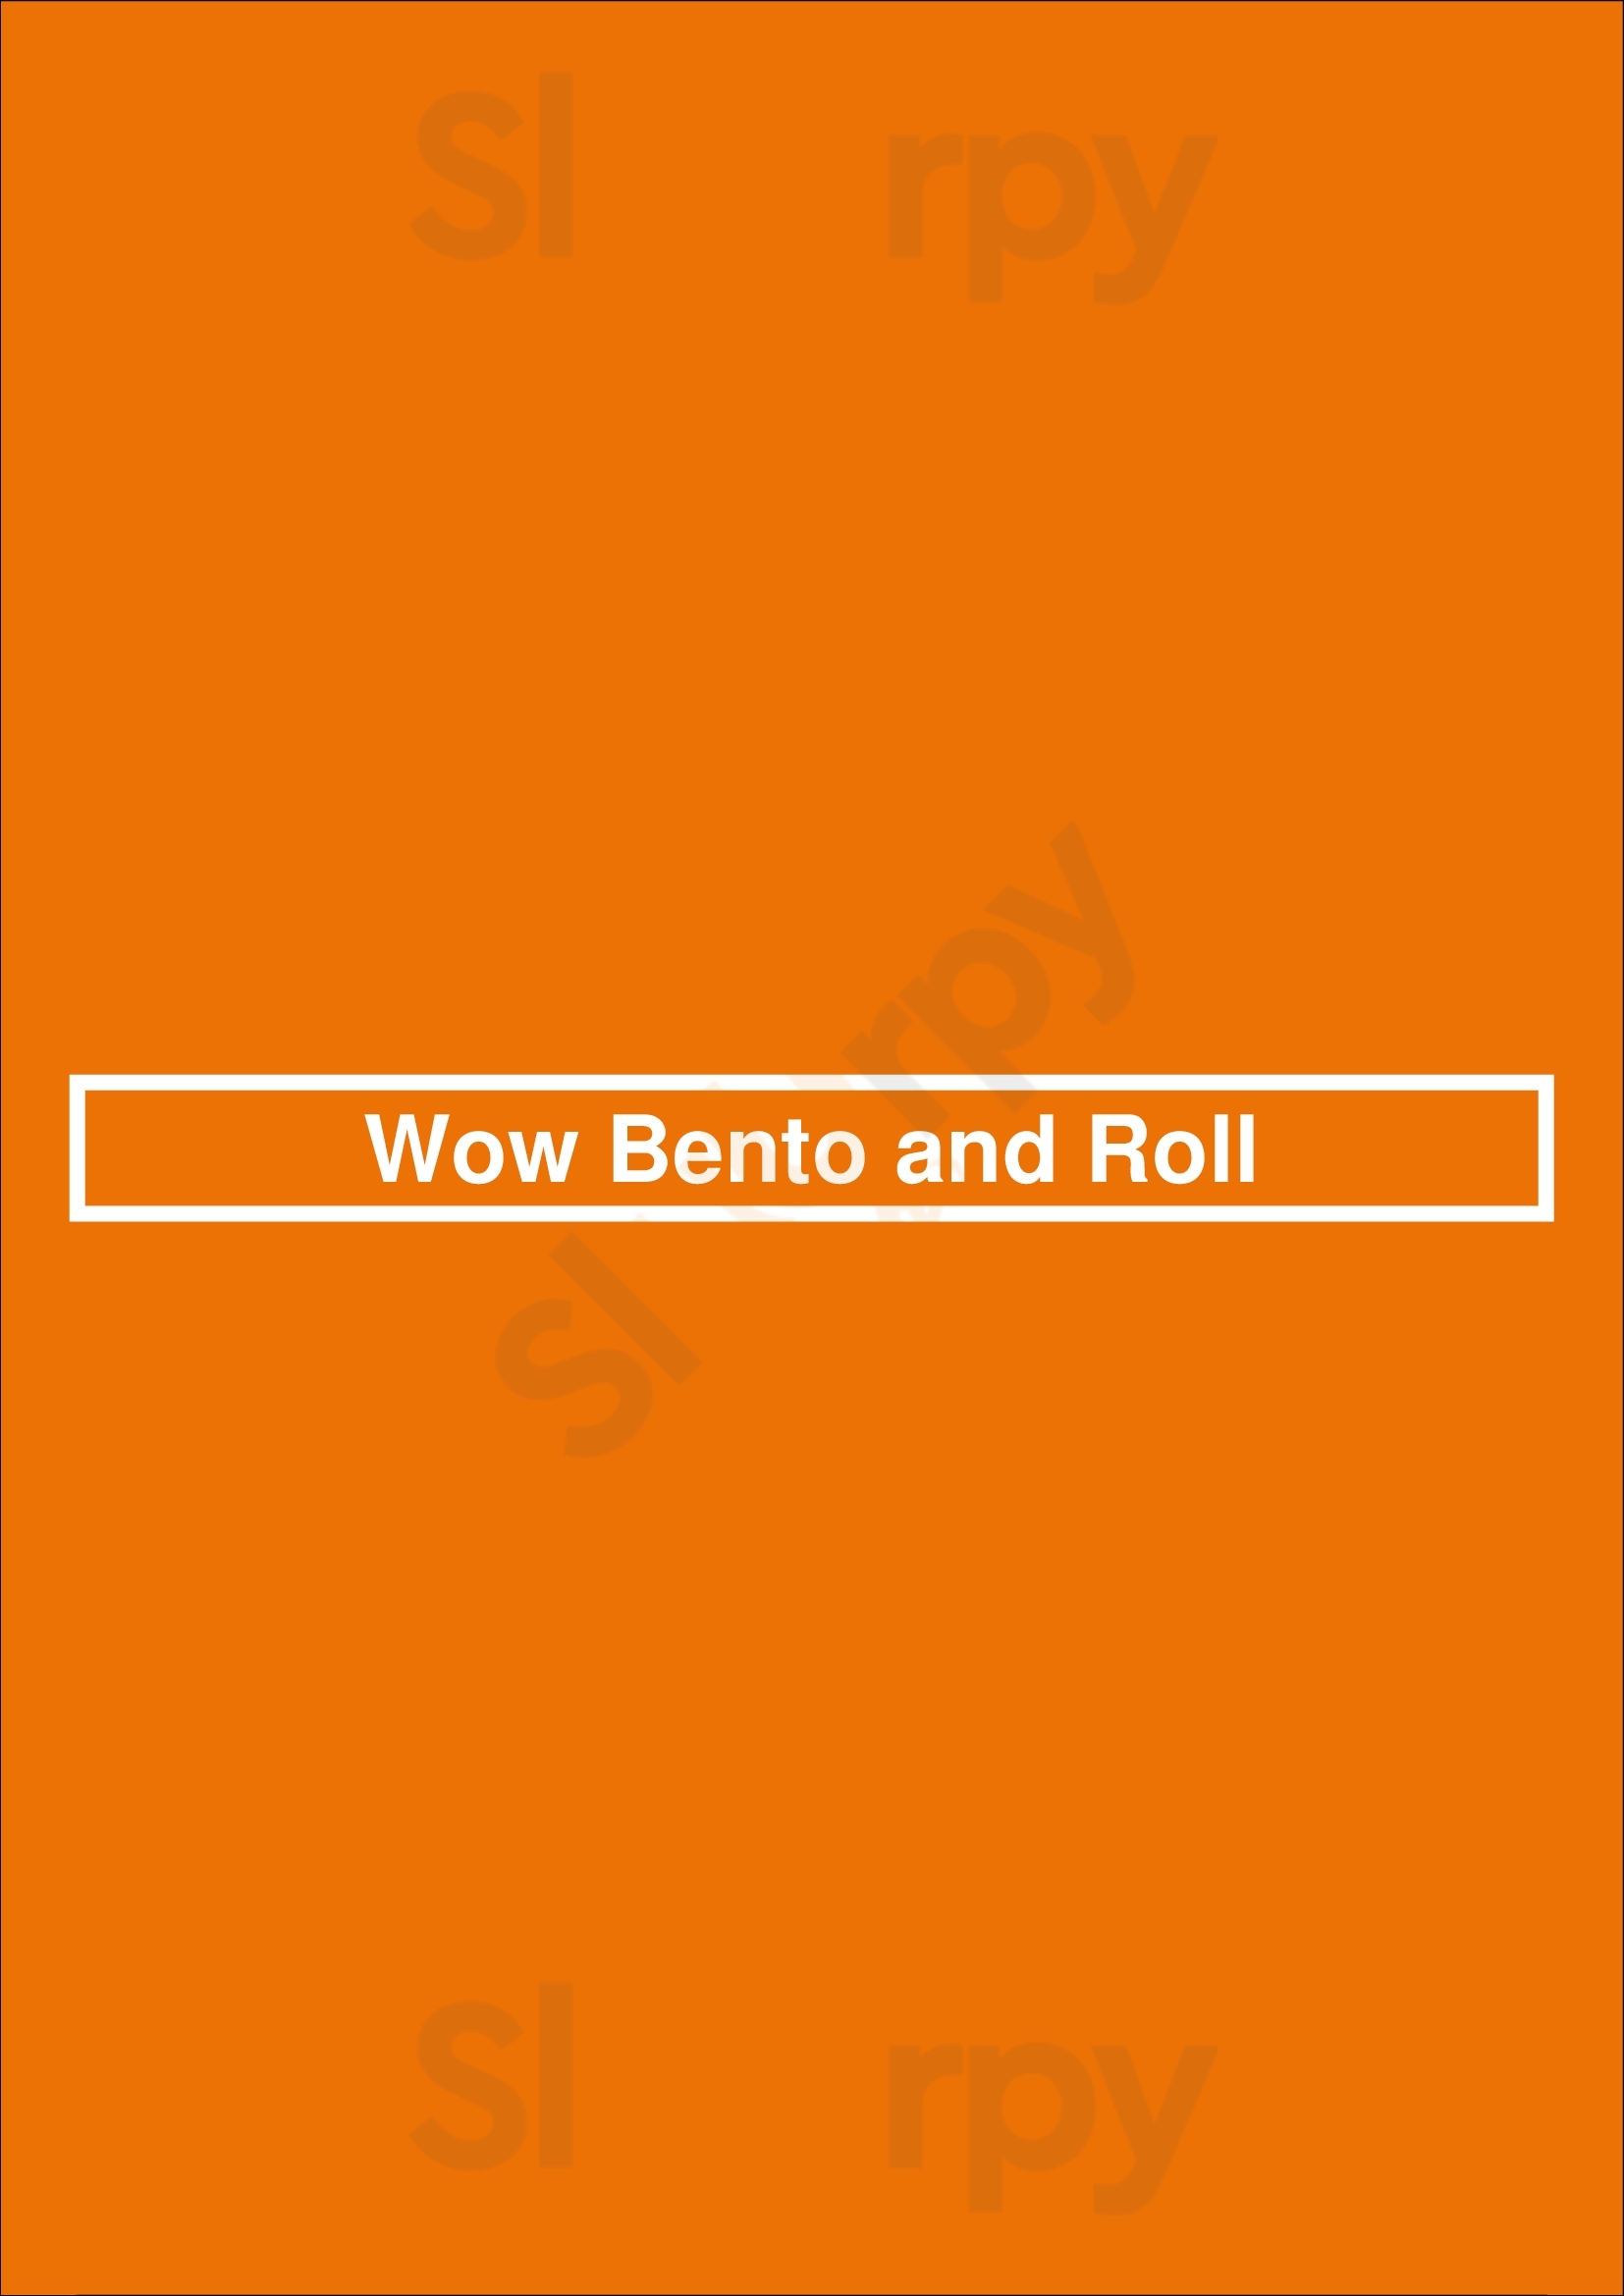 Wow Bento And Roll Los Angeles Menu - 1